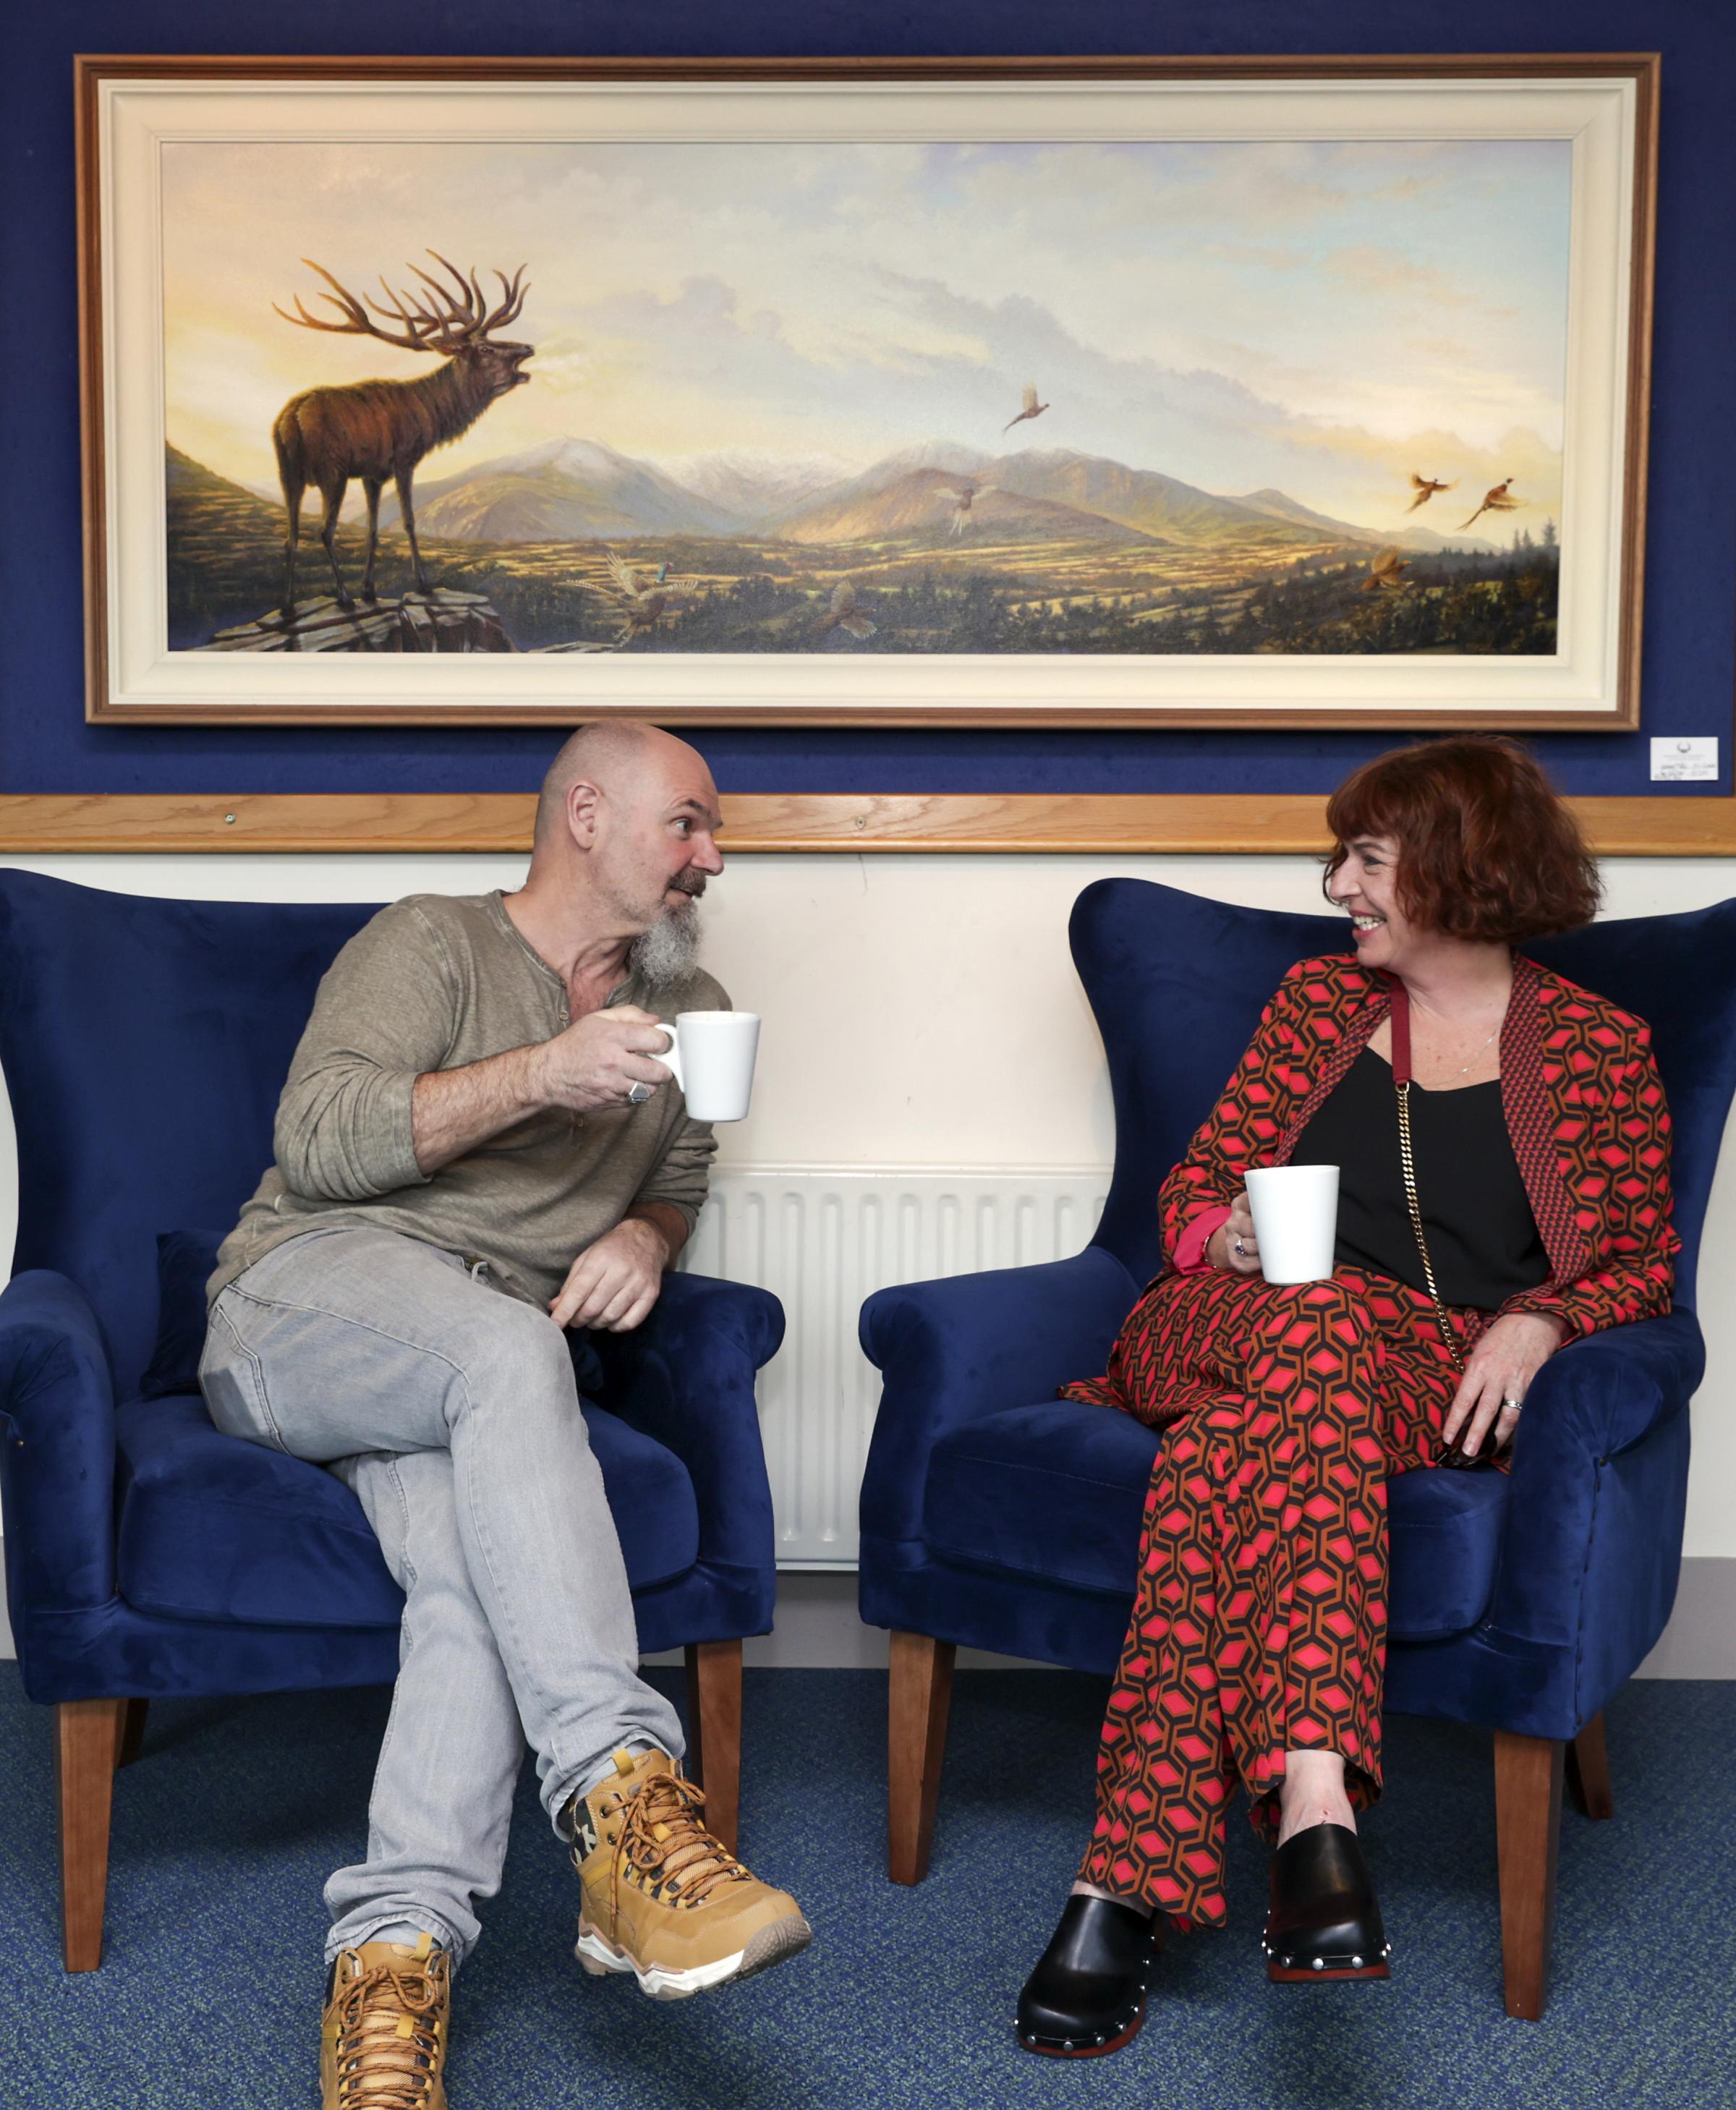 Laurence OToole, Artist, with one of his paintings The Call Over Healy Pass chatting with Ciara Hambly, Hambly and Hambly, Gallery, Dunbar House, Enniskillen.